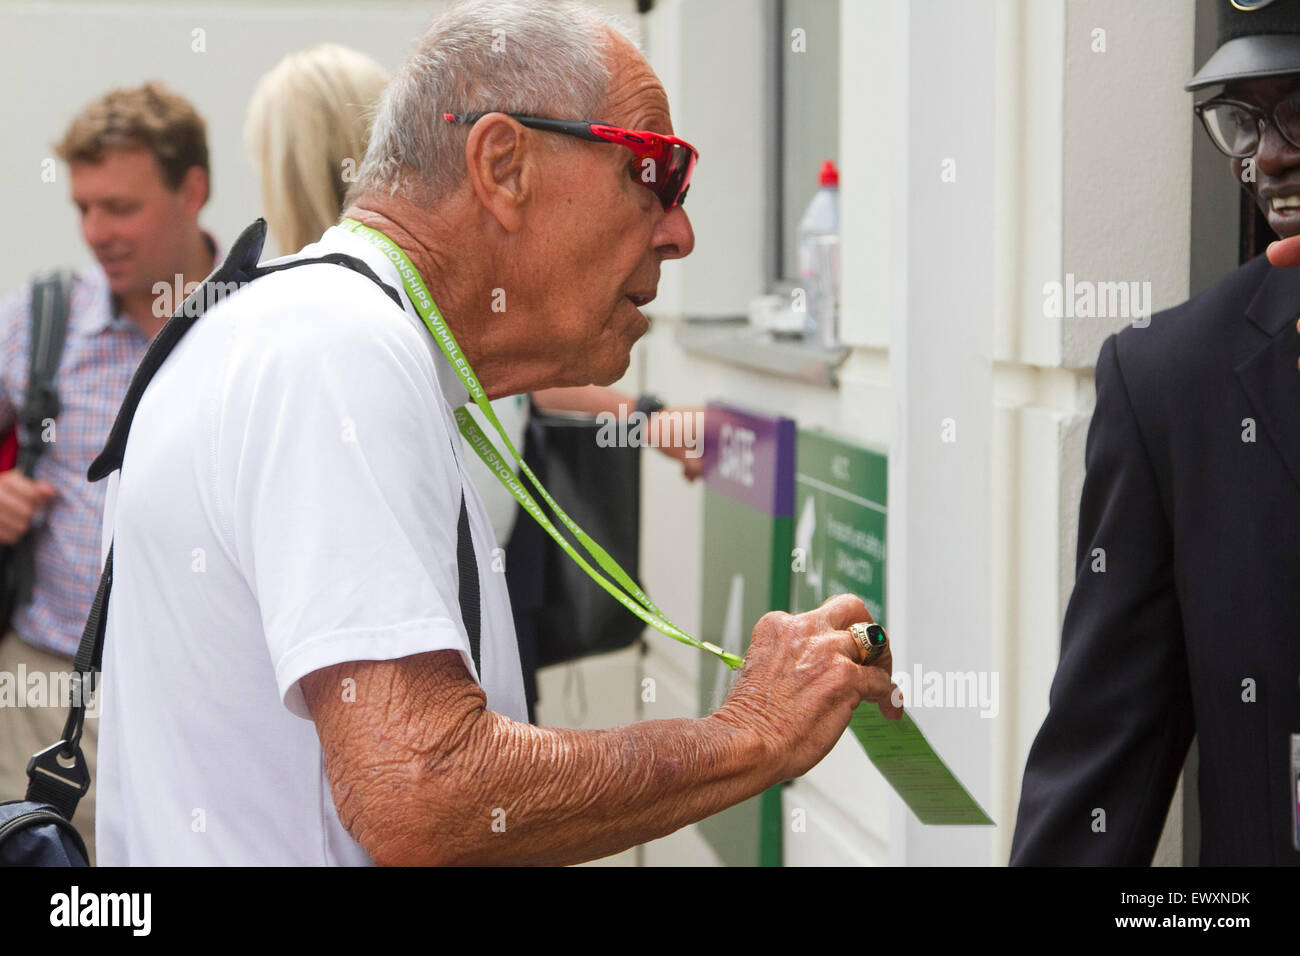 Wimbledon, London, UK. 2nd July, 2015. American tennis coach Nick Bollettieri who was credited for developing many tennis players including Andre Agassi, Jim Courier and many tennis stars arrives at the AELTC on day 4 of the Wimbledon tennis championships Stock Photo